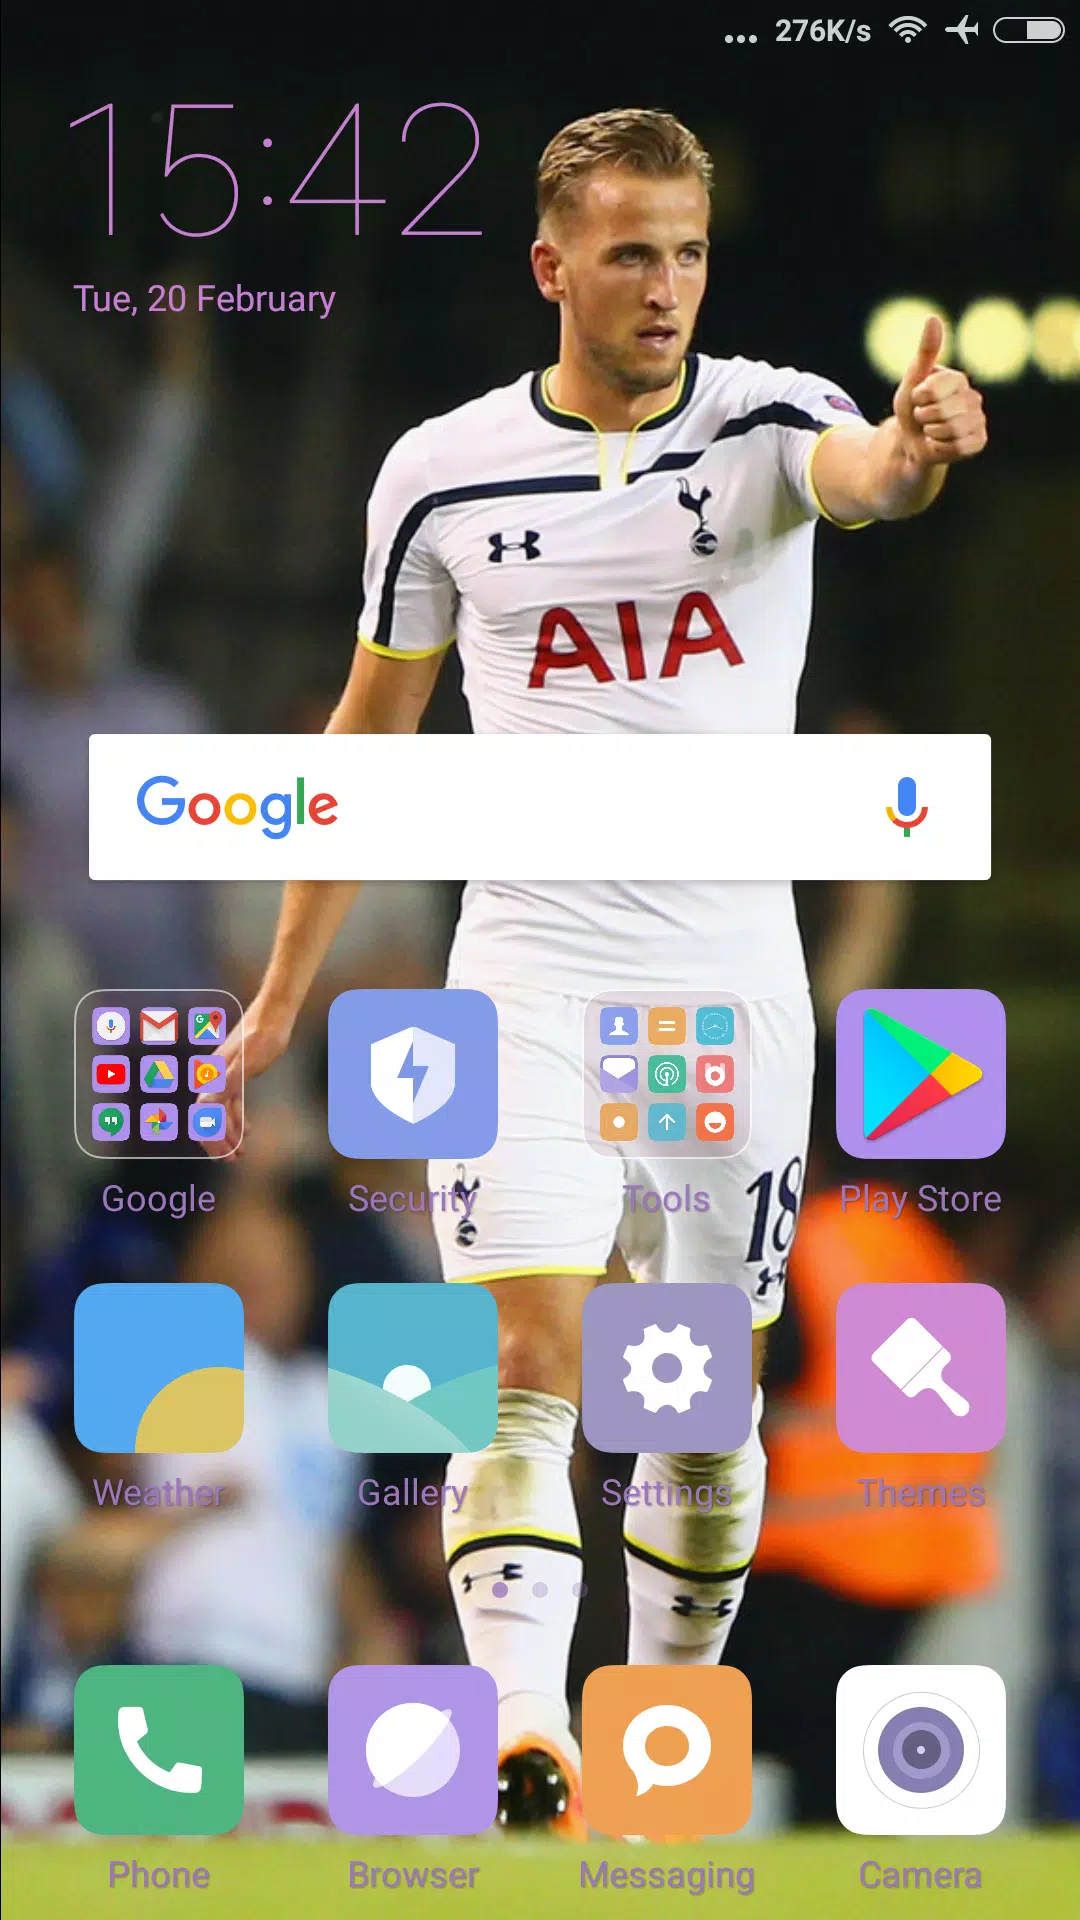 Harry Kane Wallpapers - Wallpaper Cave